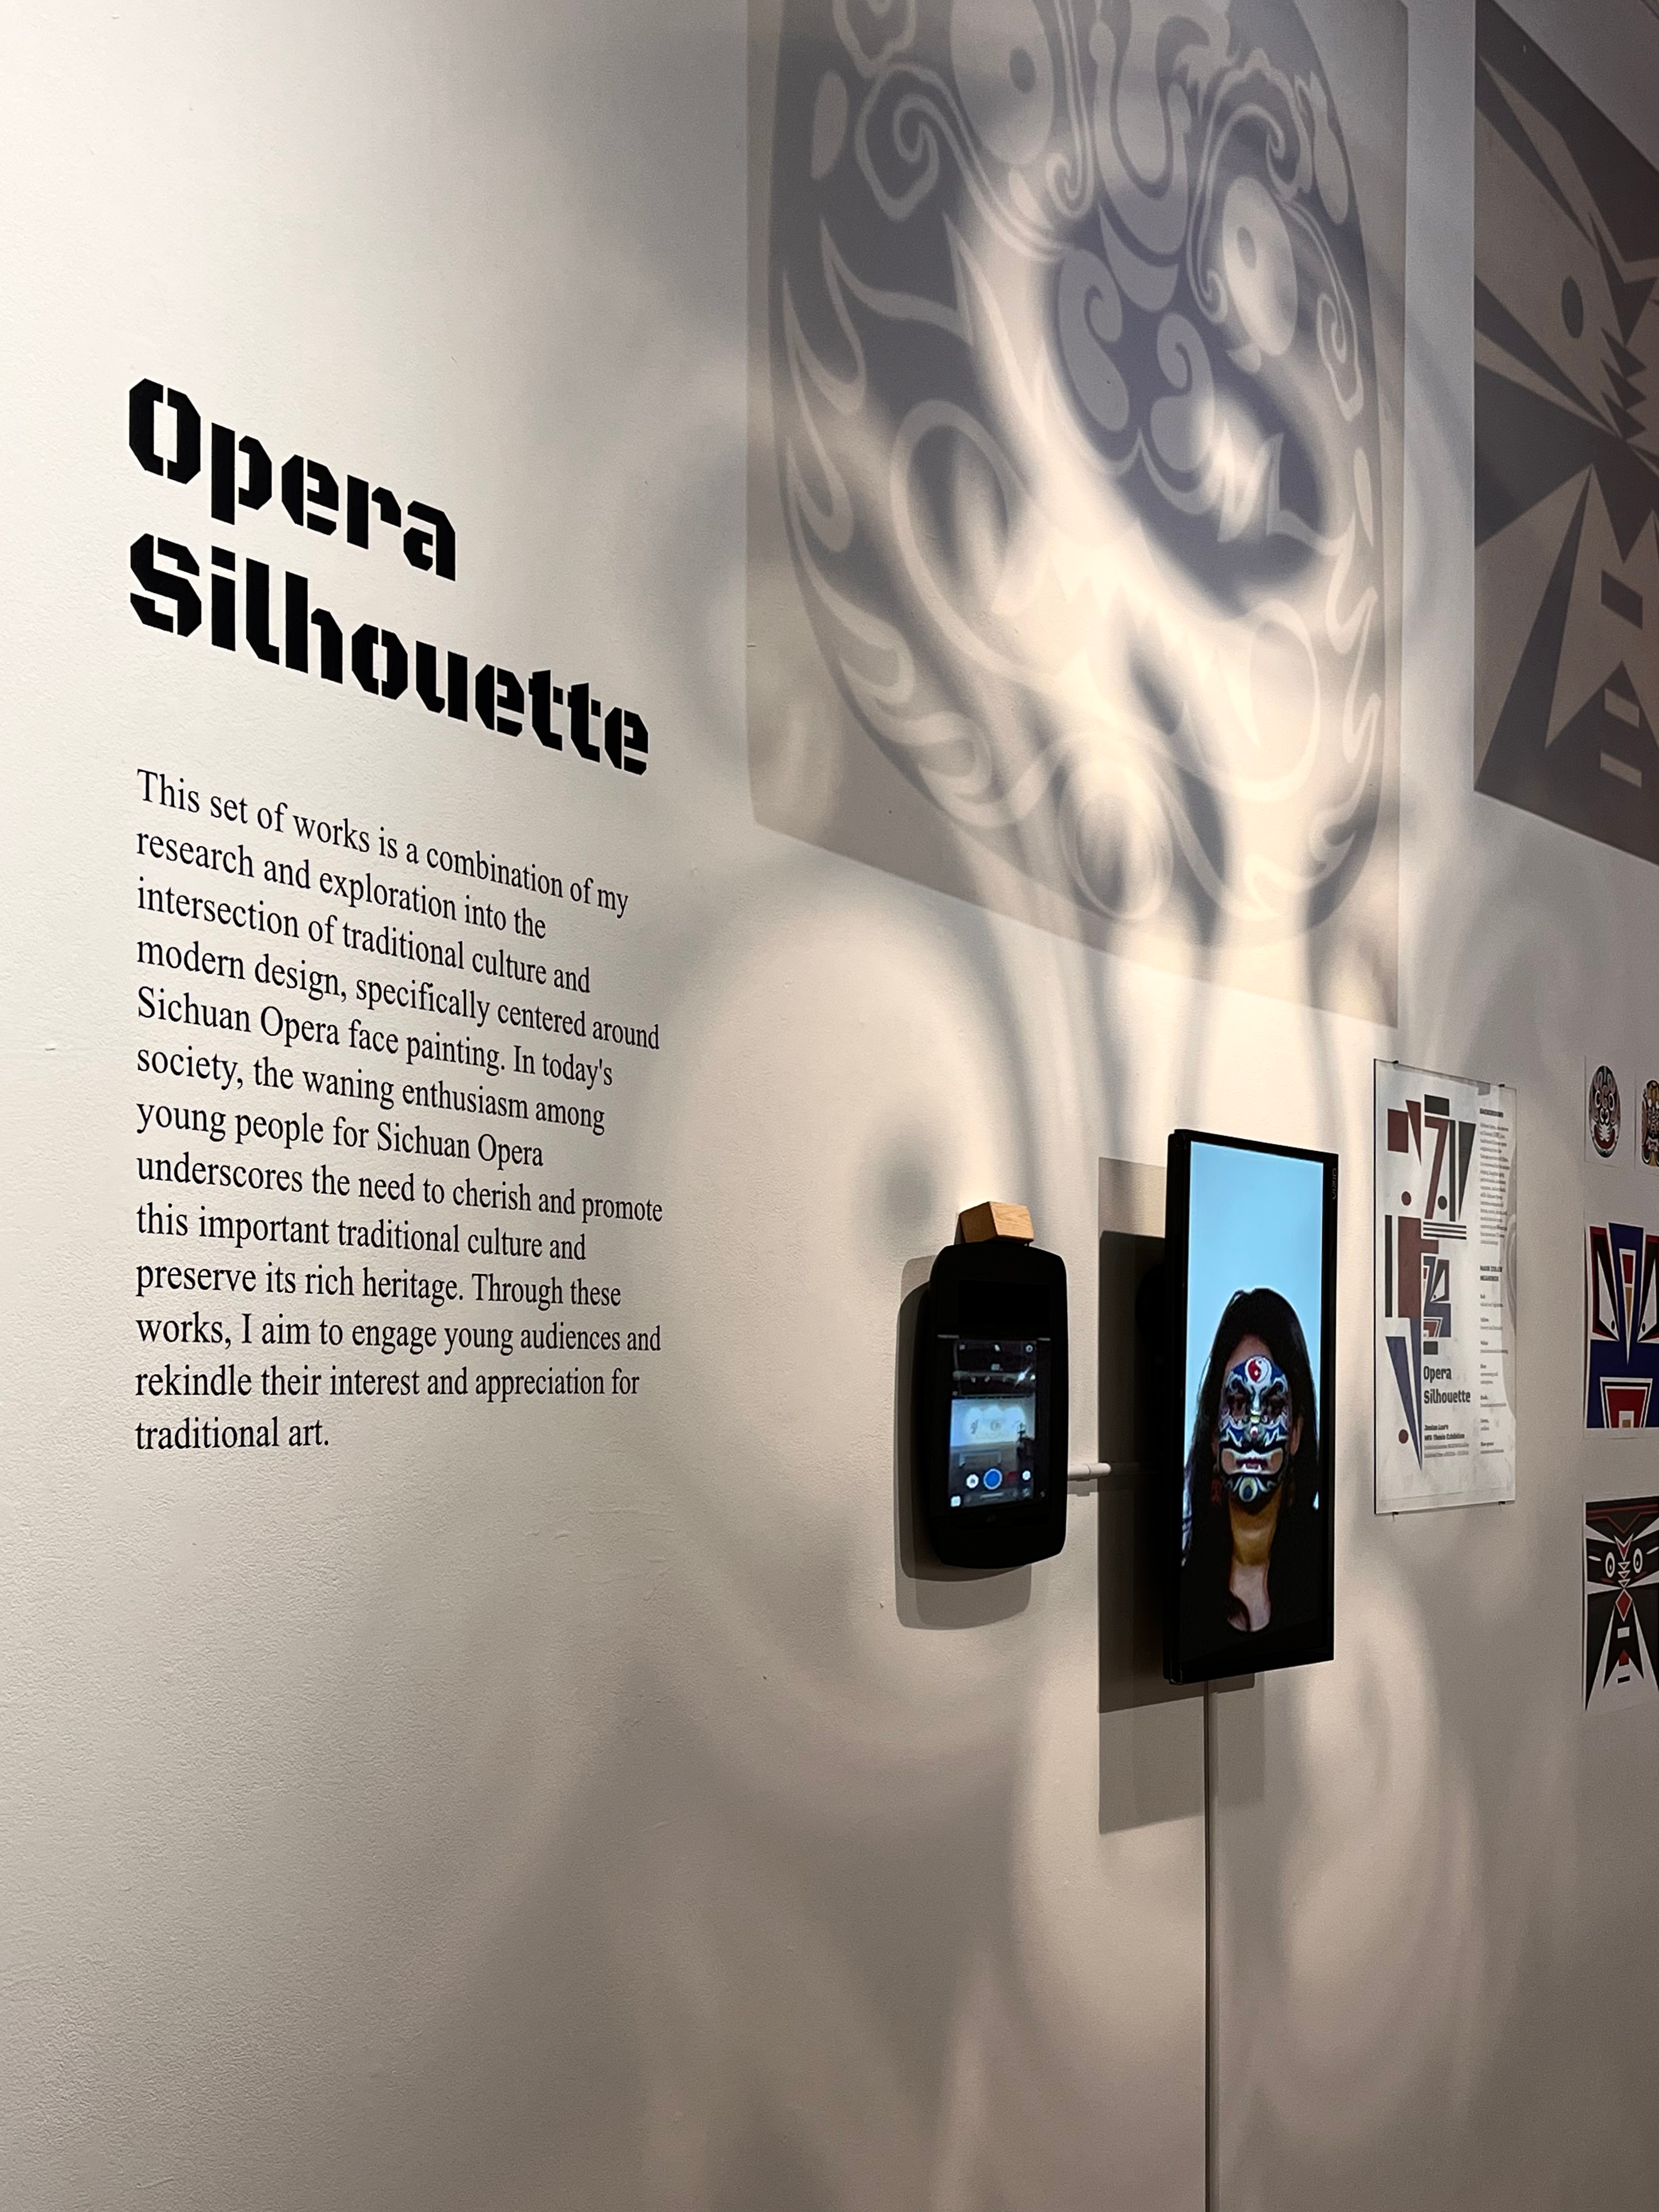 Image of Junlan's thesis exhibition work titled "Opera Silhouette." Includes vinyl didactic, tablet with interactive interface to take selfies with AR opera masks, and shadows from hanging prints of opera masks on transparent substrate.